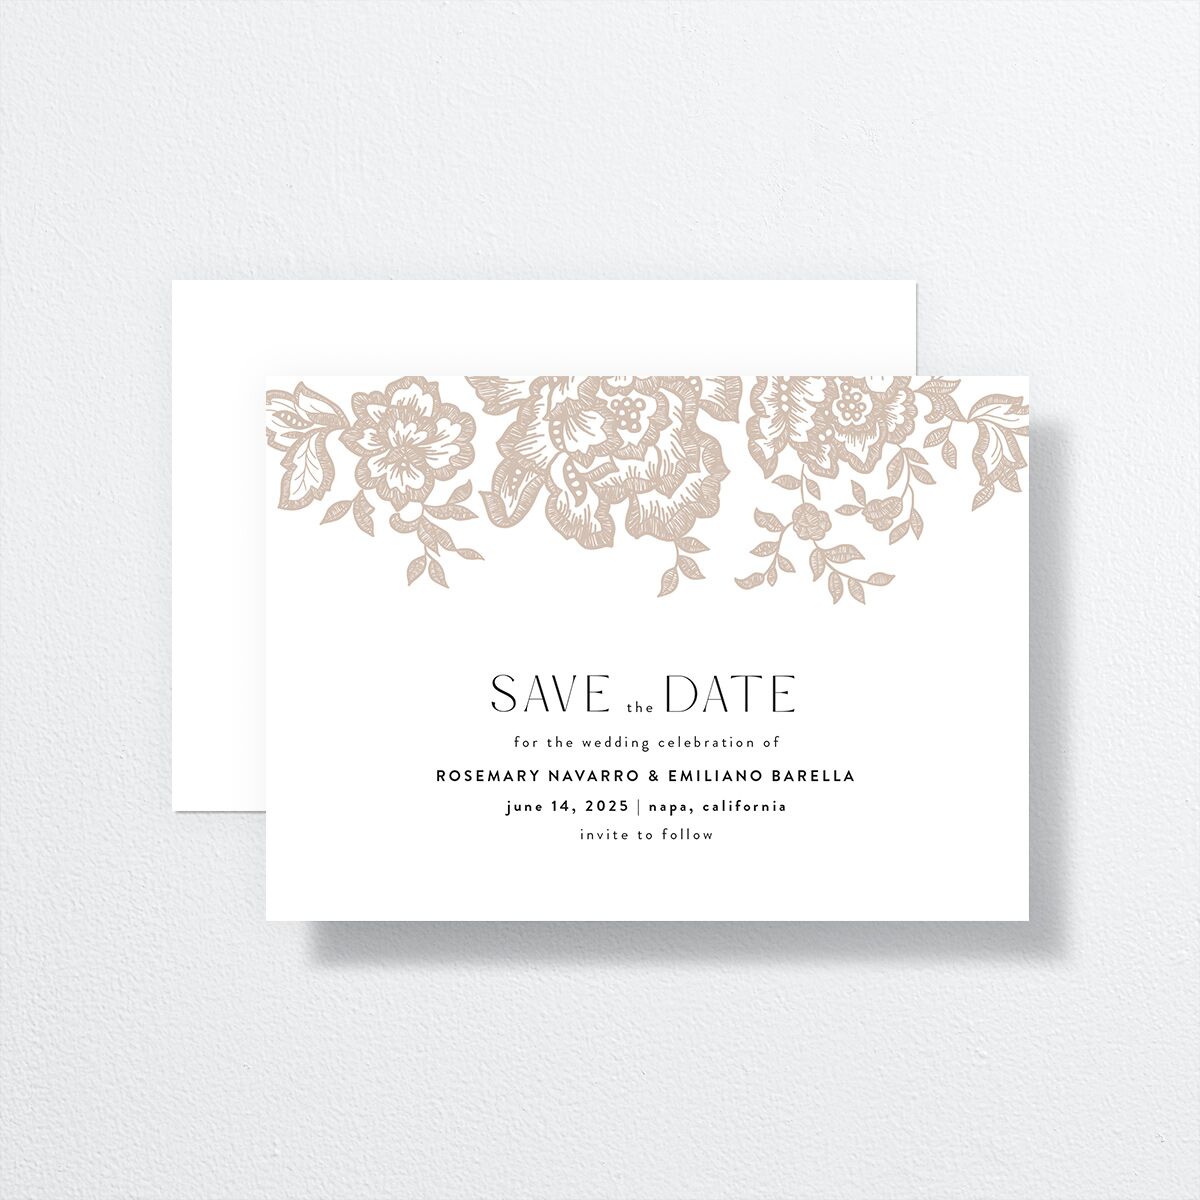 Etched Florals Save The Date Cards by Vera Wang front-and-back in cream